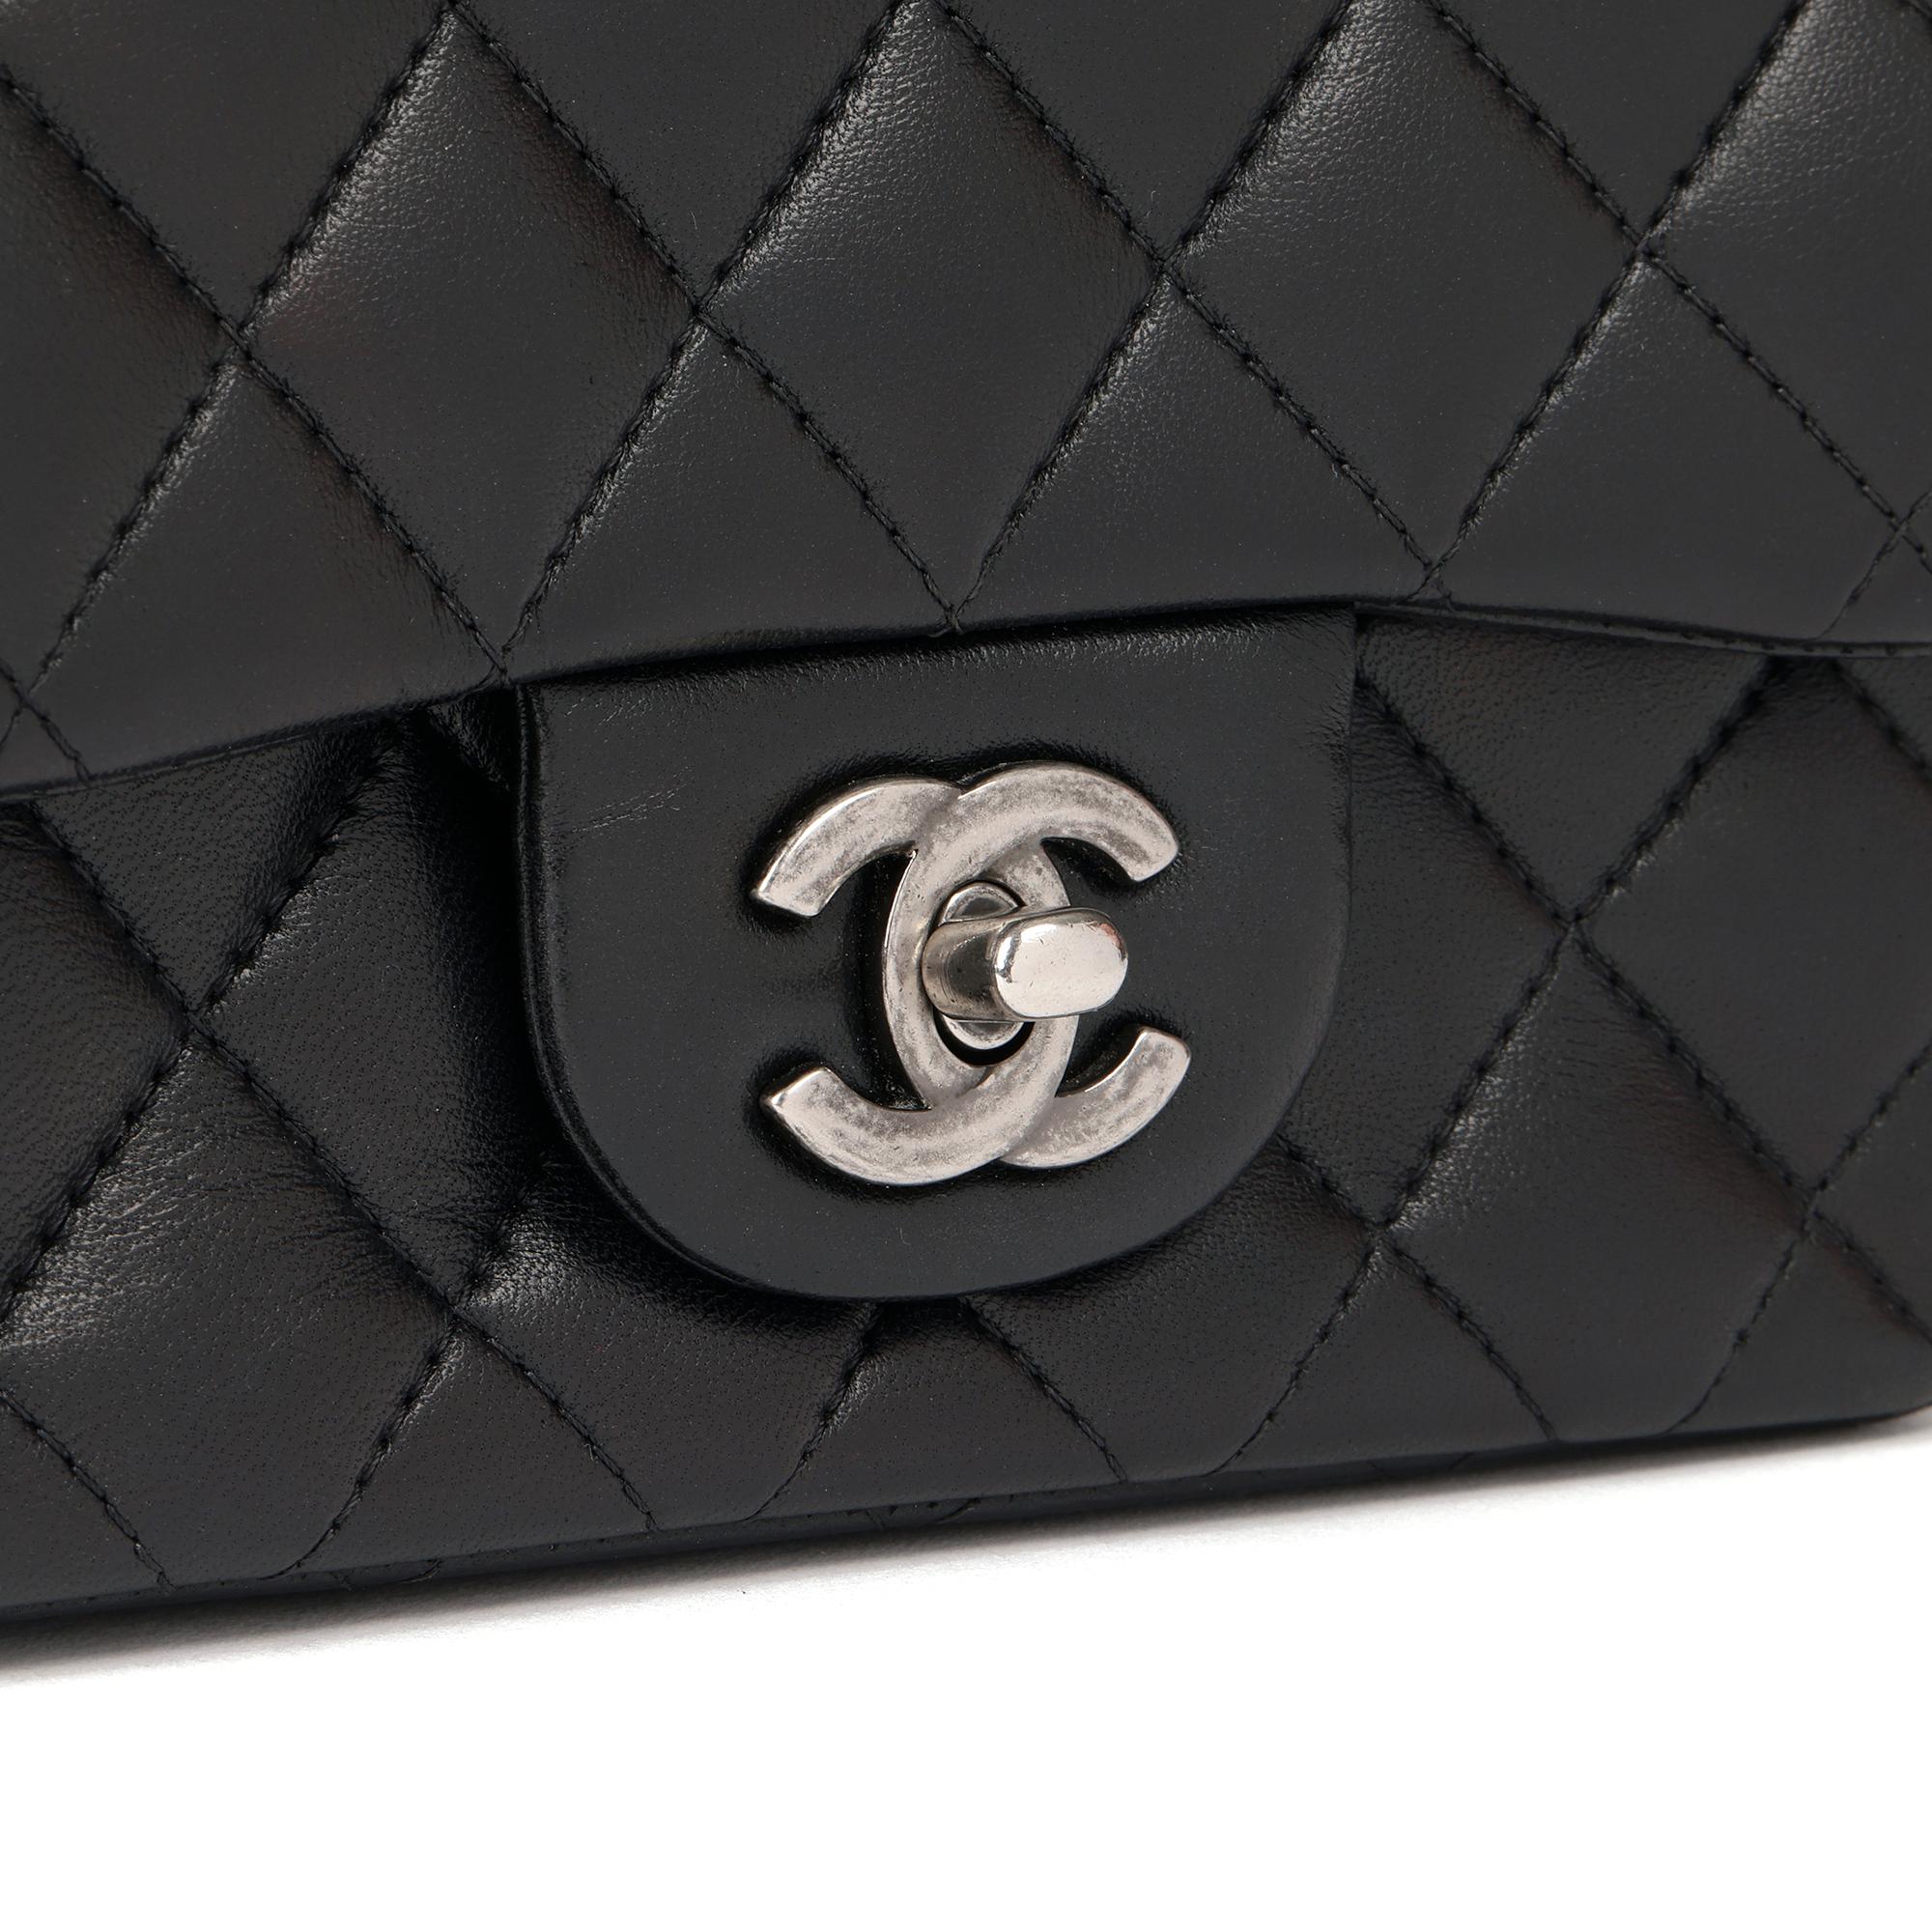 CHANEL 
Black Quilted Lambskin Leather Mini Flap Bag

Xupes Reference: CB329
Serial Number: 20005729
Age (Circa): 2015
Accompanied By: Chanel Dust Bag, Box, Authenticity Card, Care Booklet
Authenticity Details: Date Stamp (Made in France) 
Gender: